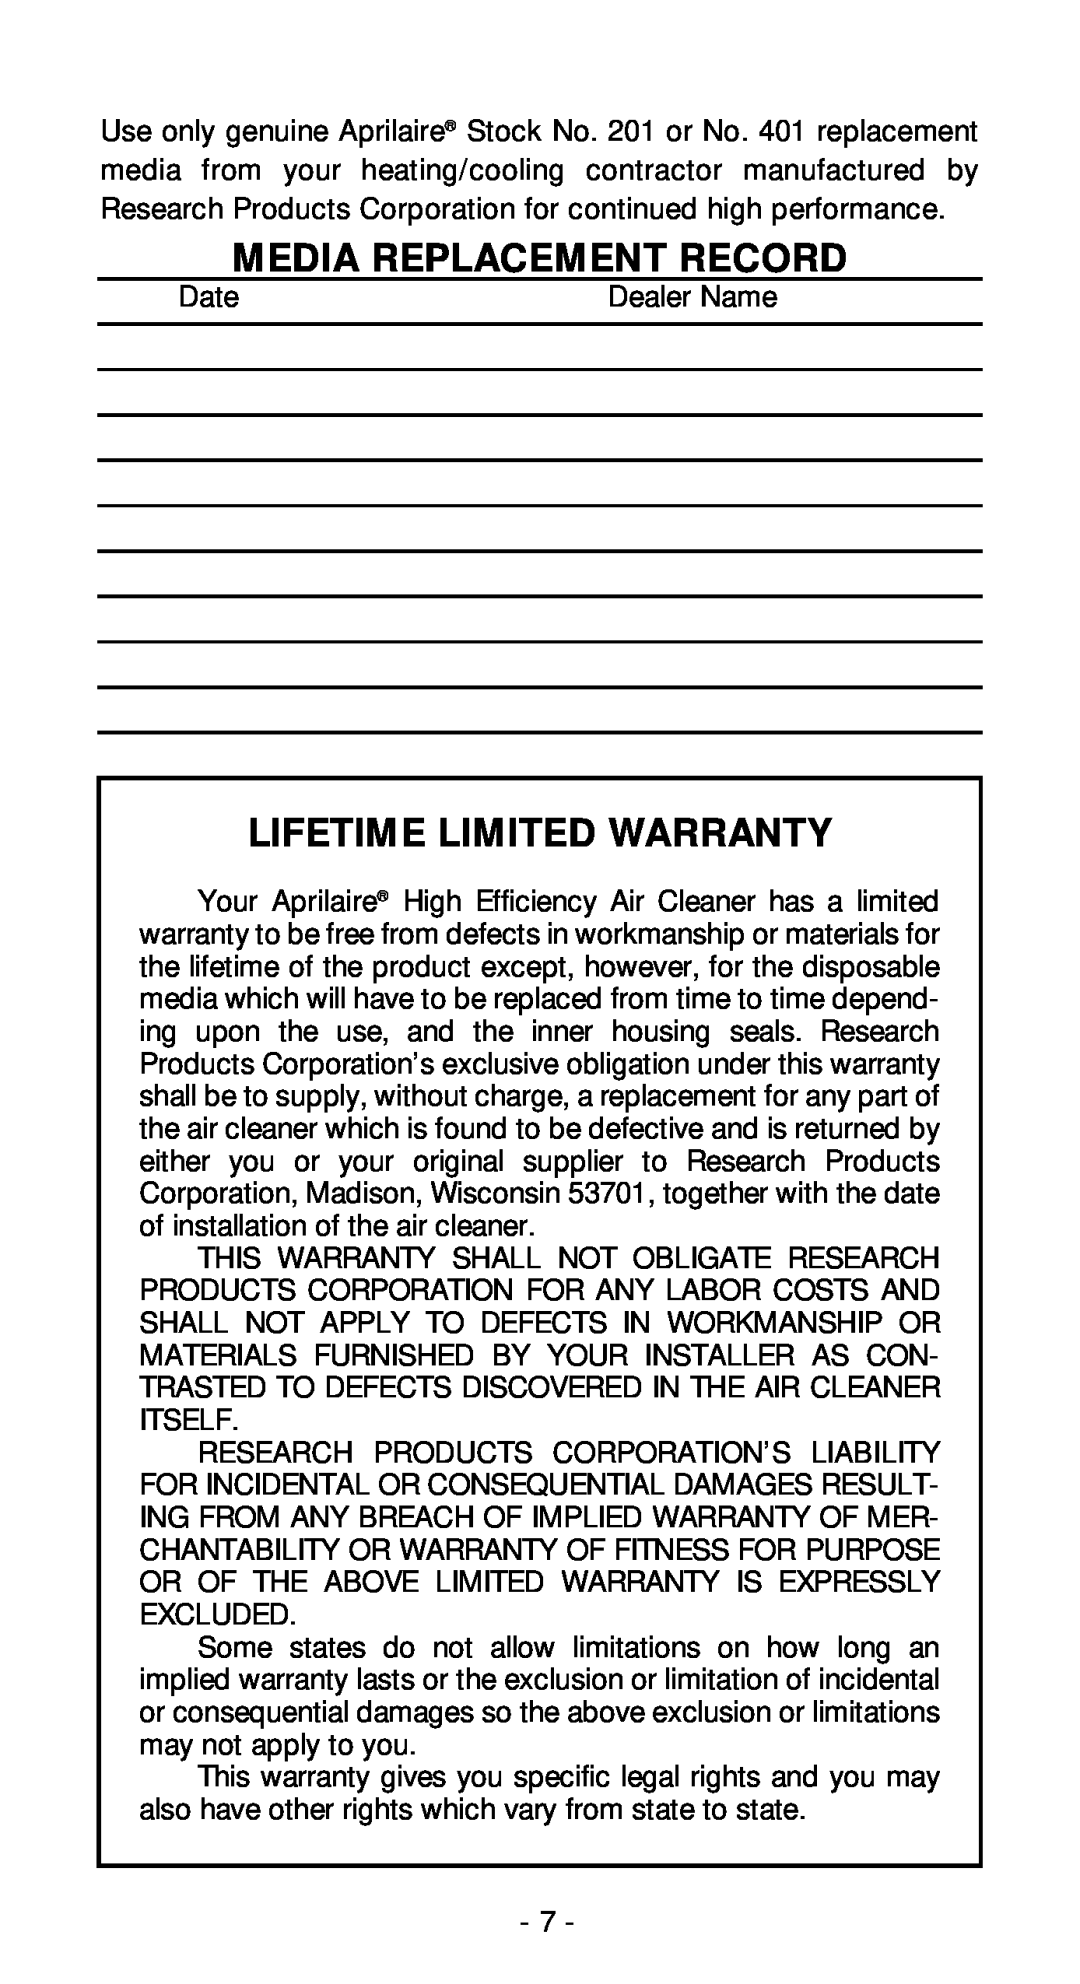 Aprilaire 2250 & 2400 owner manual Media Replacement Record, Lifetime Limited Warranty 